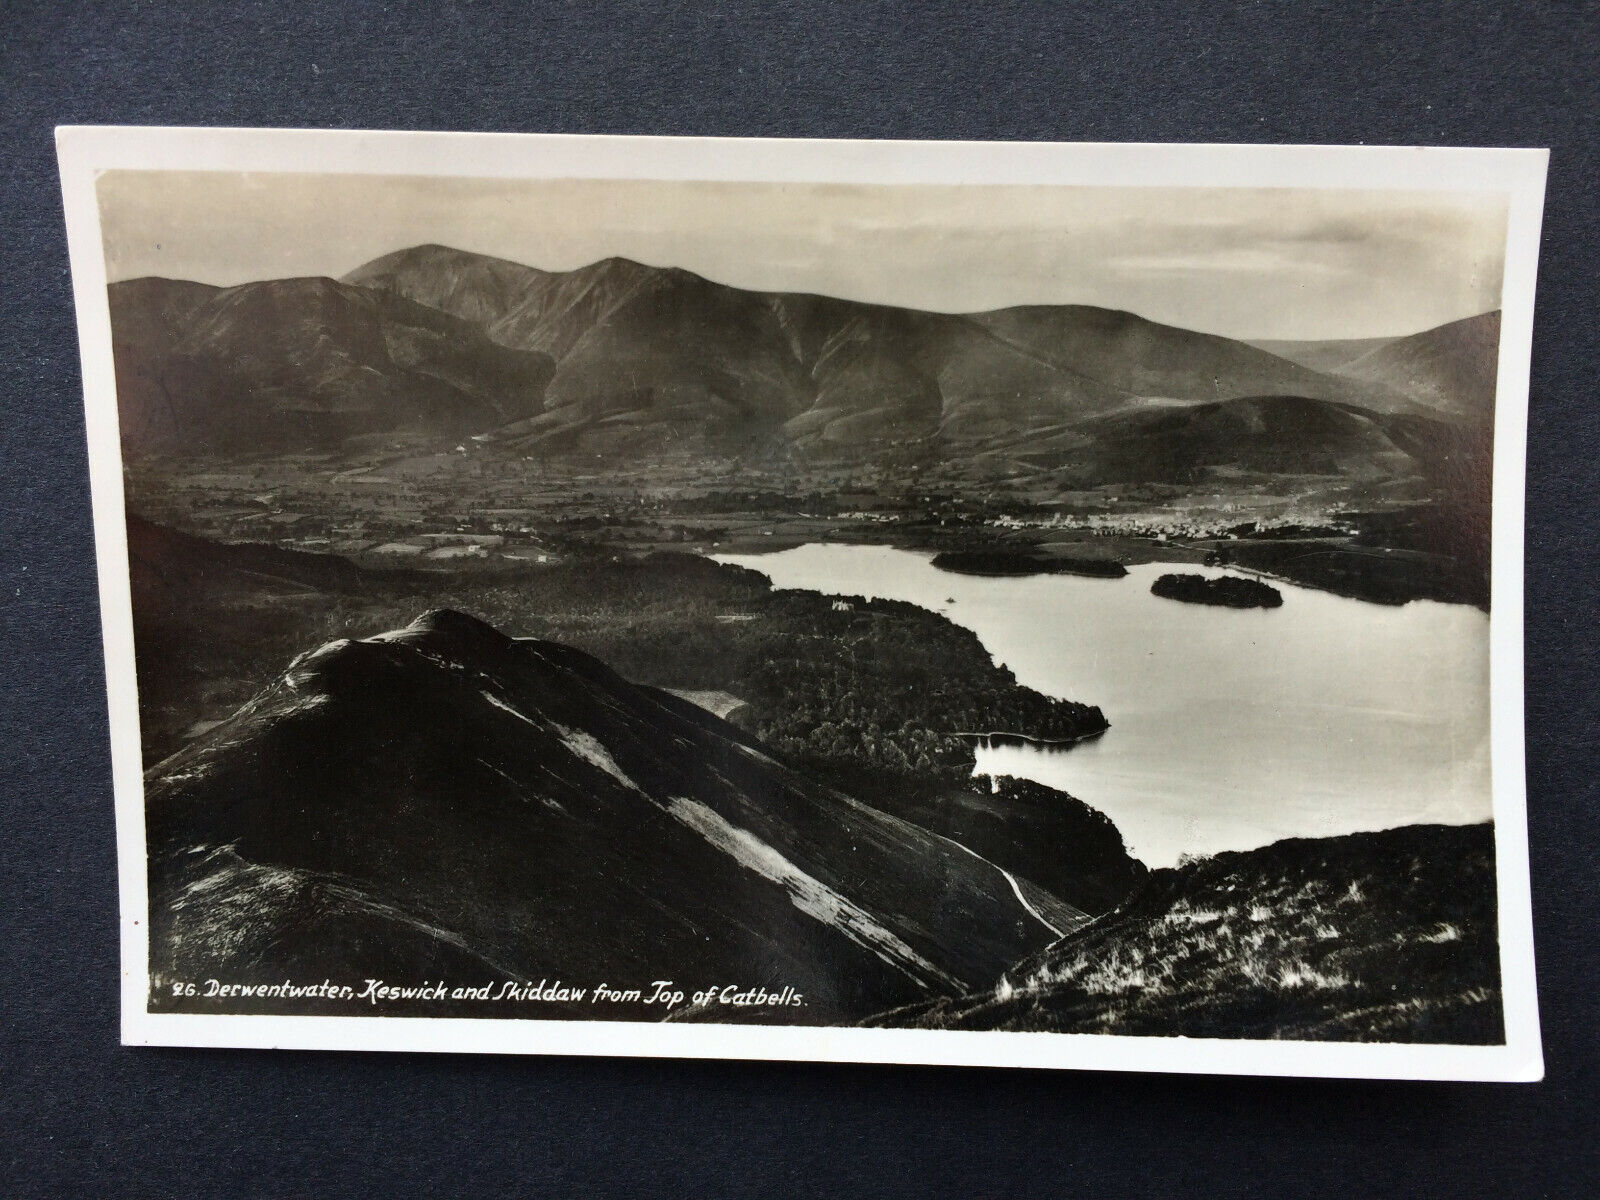 House Clearance - Real Photo Service - Derwentwater, Keswick and Skiddaw from Top of Catbells